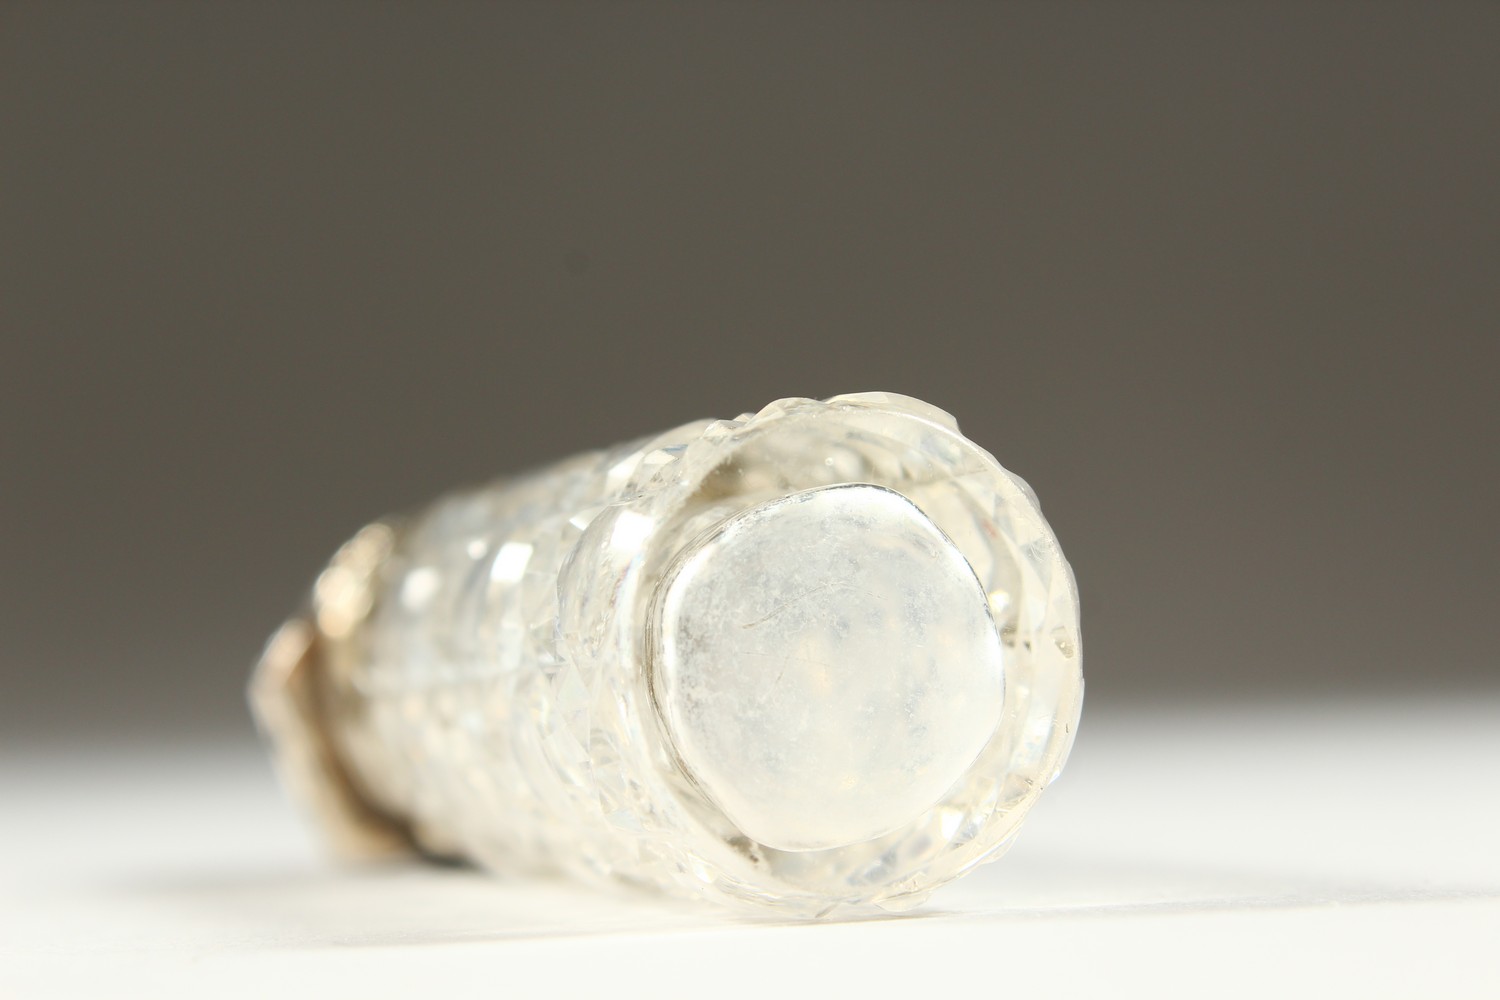 A VICTORIAN PLAIN CUT GLASS SCENT BOTTLE with repousse silver top and plain glass stopper. - Image 4 of 10